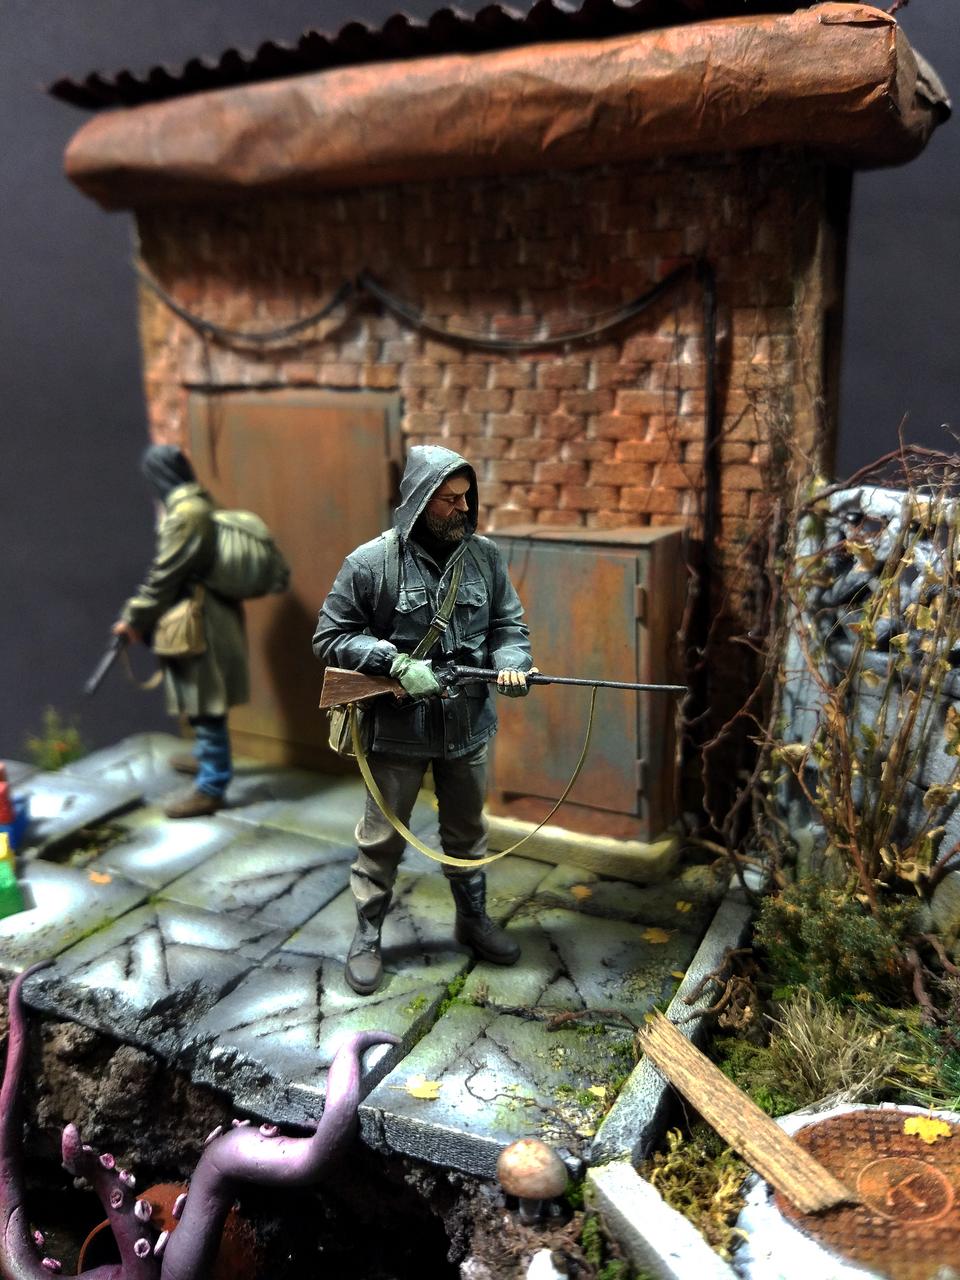 Dioramas and Vignettes: New undiscovered world, photo #4